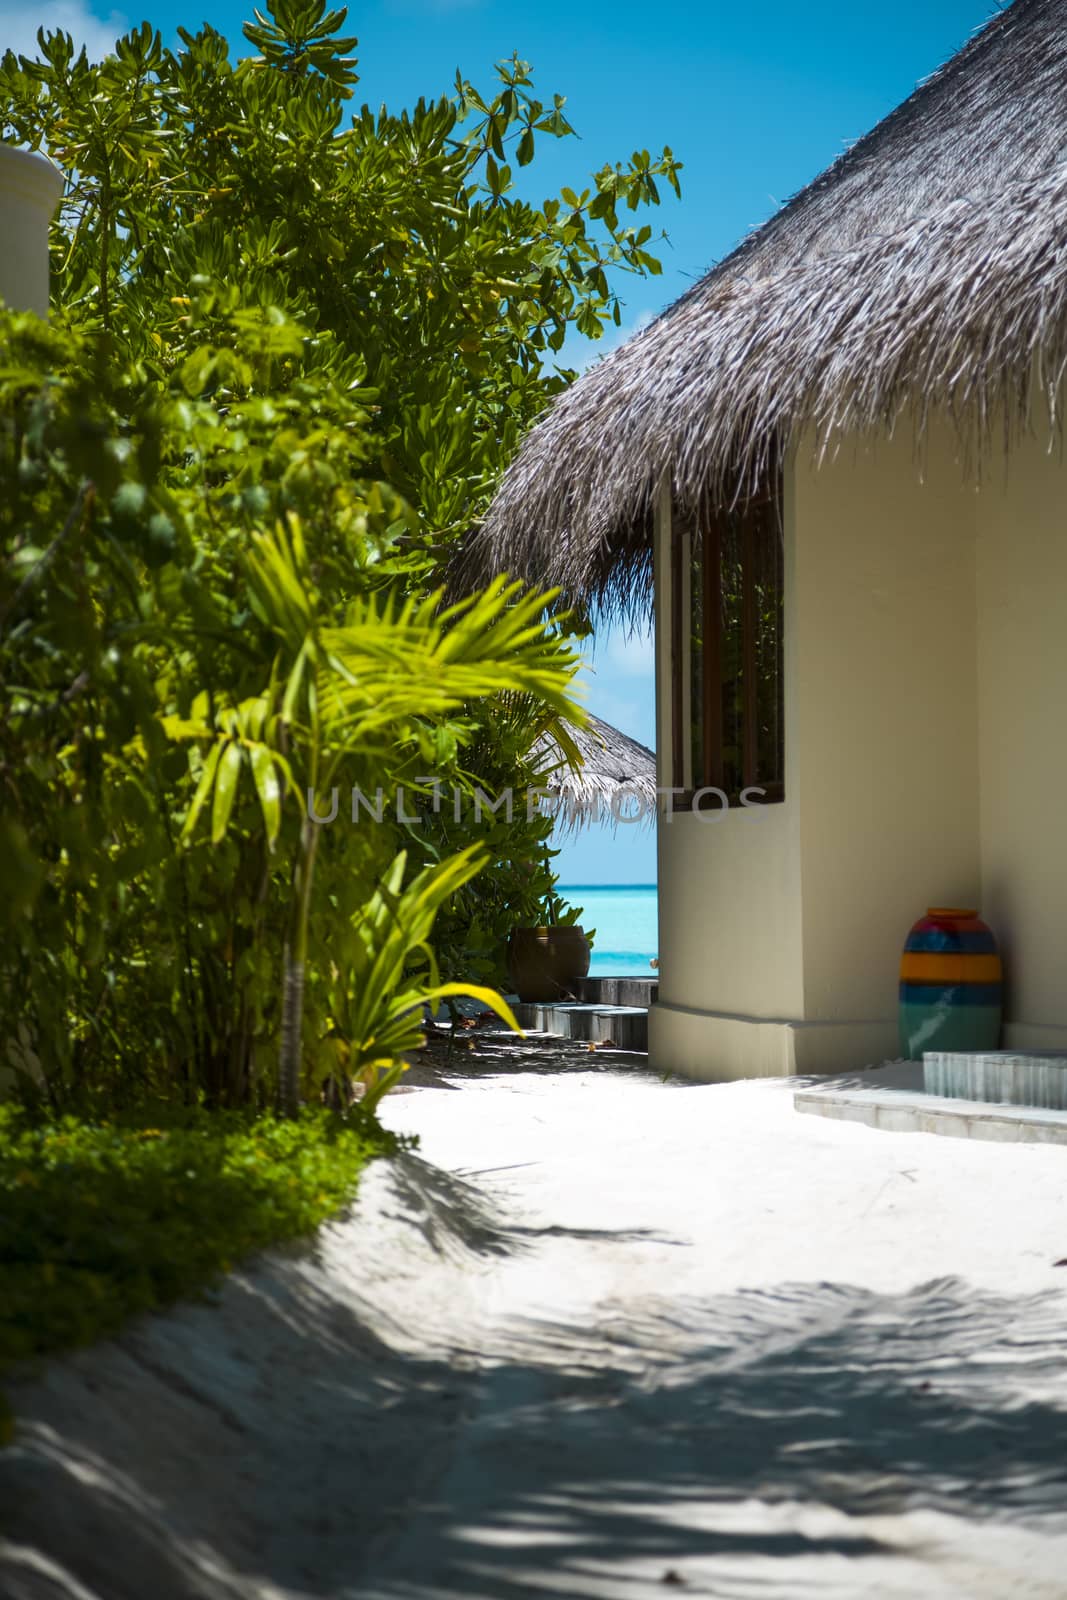 View of a Tropical Beach Villa and a Corner of Vegetation in a T by Nemida